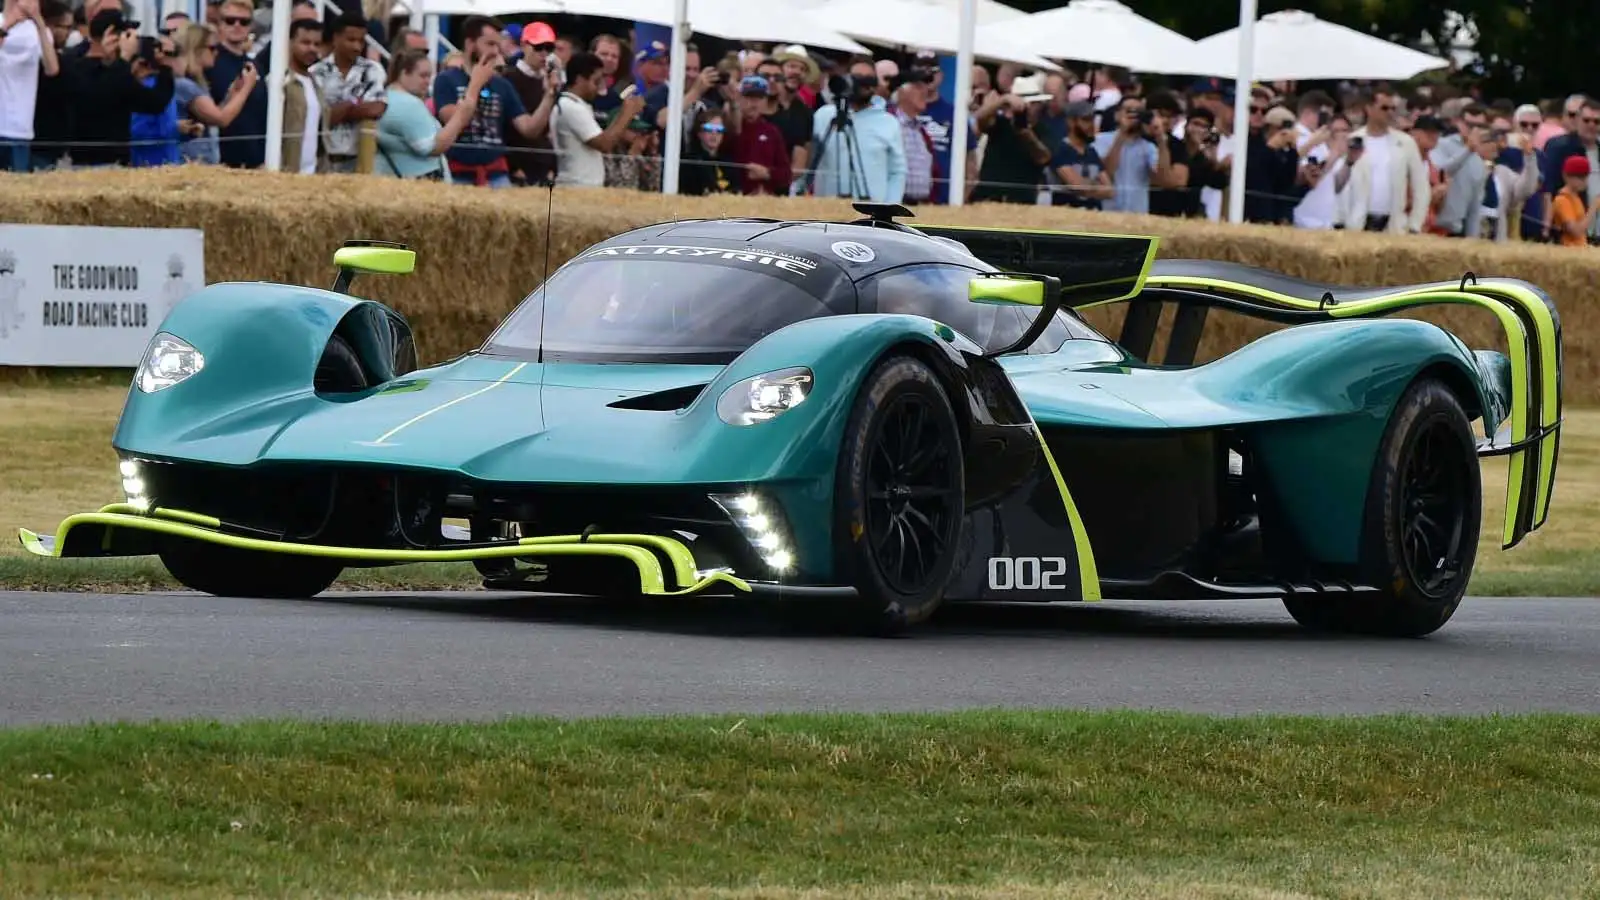 An Aston Martin Valkyrie, owned by Fernando Alonso.